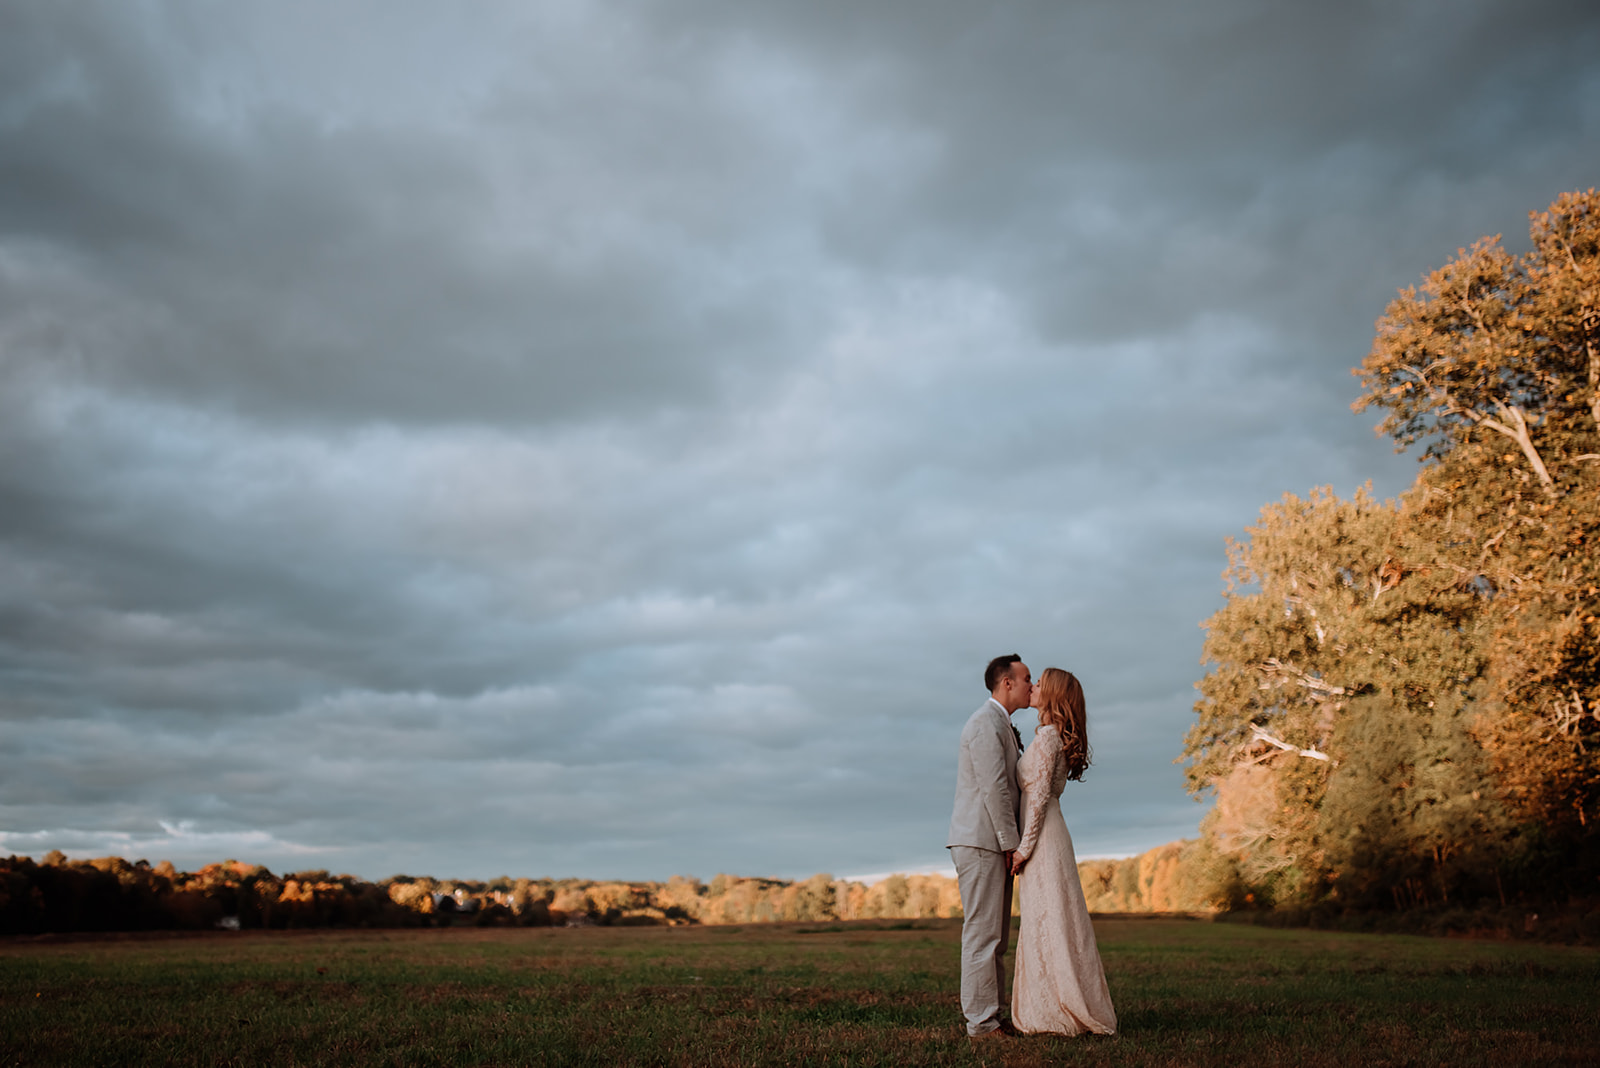 Couple shares a sweet kiss during golden hour on a cloudy day standing in a farm field.